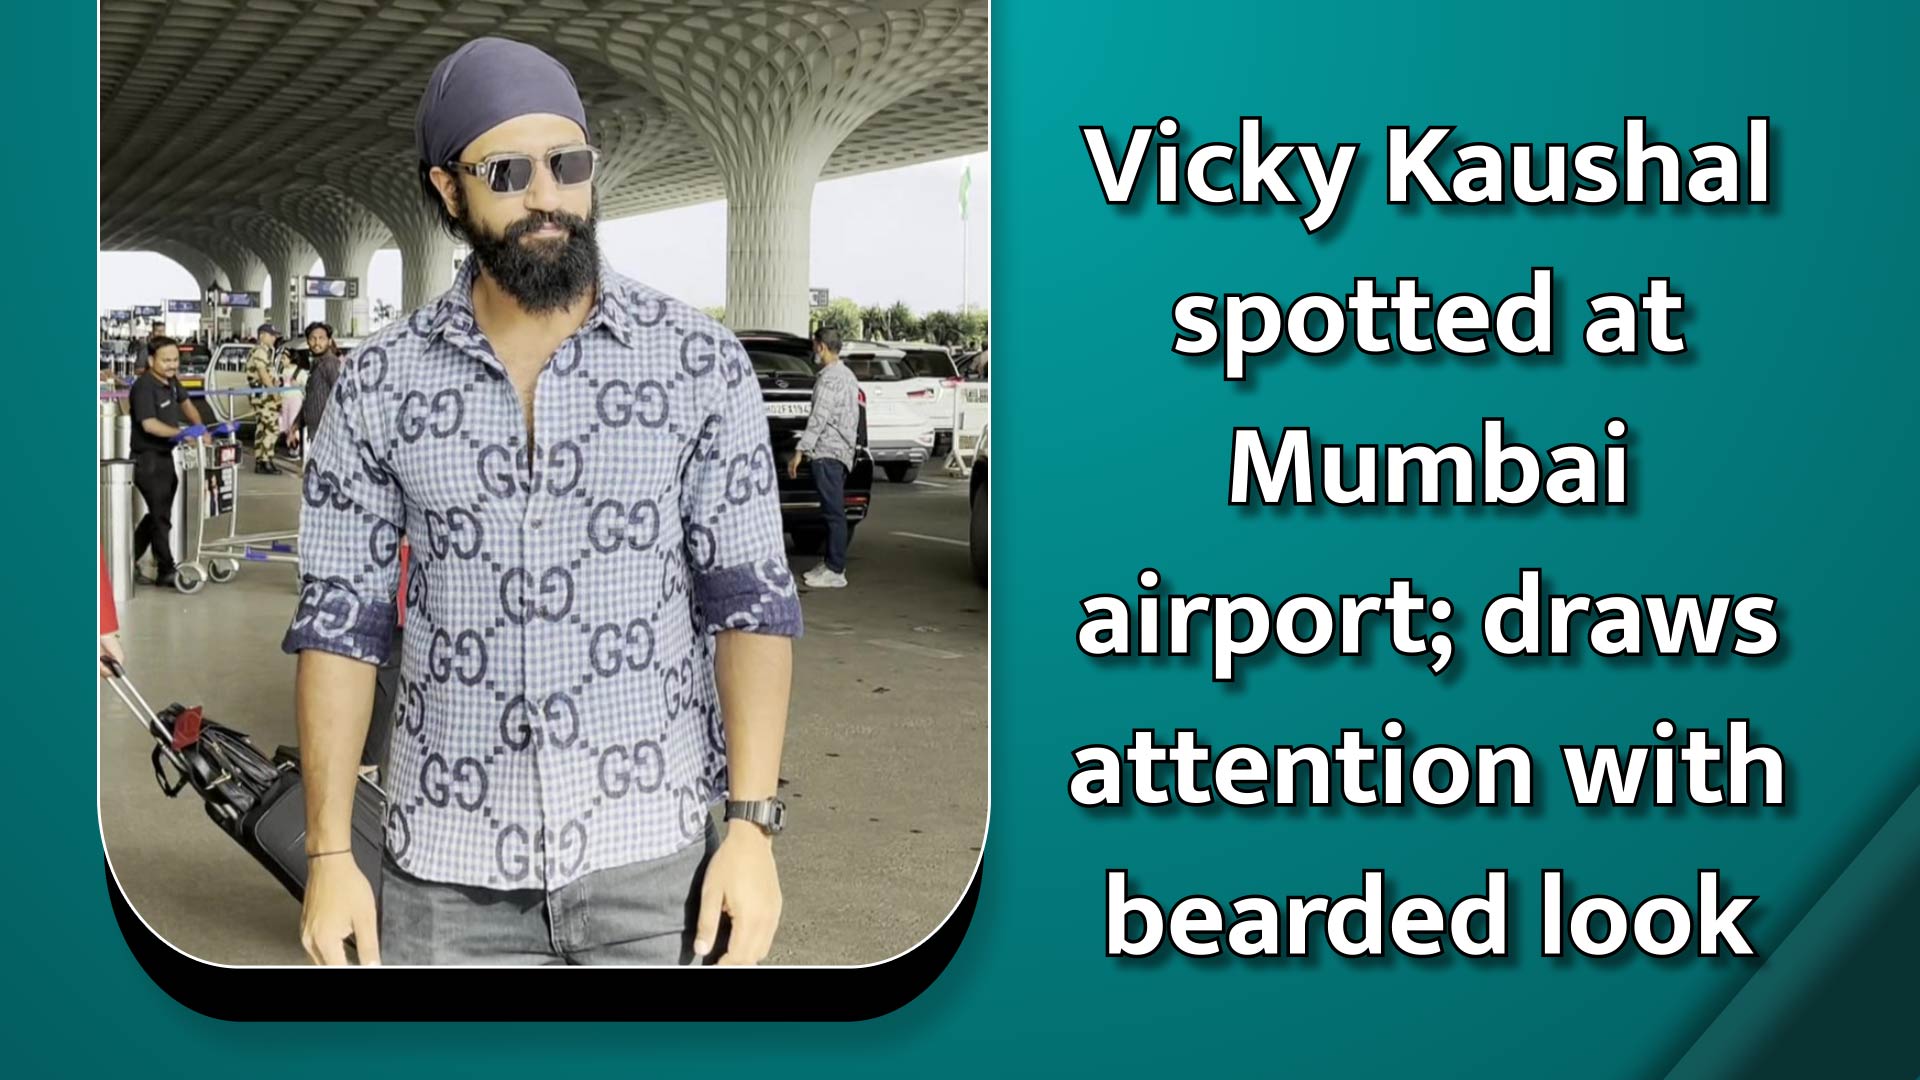 Vicky Kaushal spotted at Mumbai airport; draws attention with bearded look